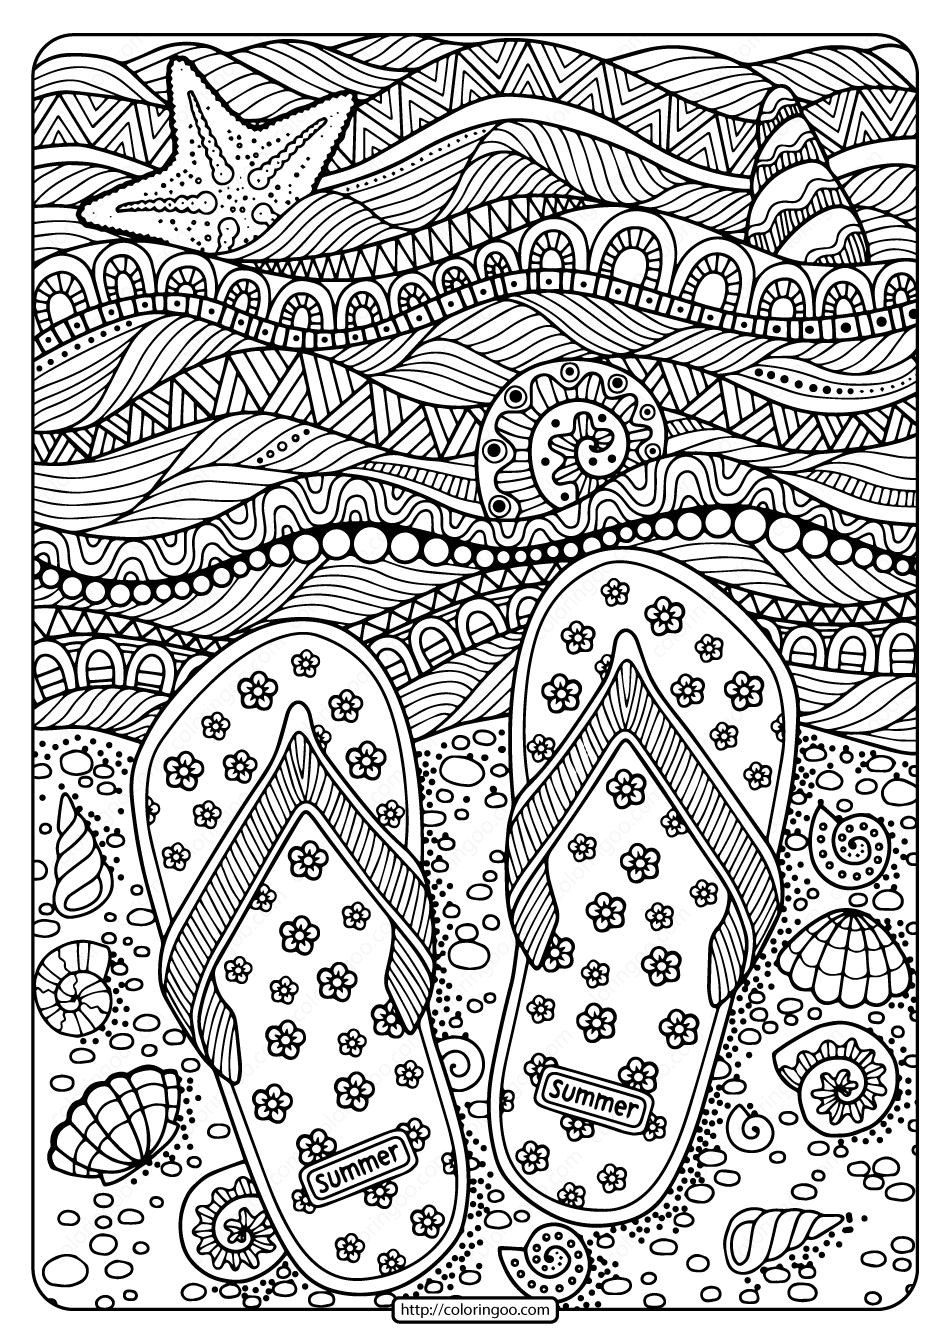 summer coloring pages for seniors | summer coloring pages online | summer coloring pages for adults free